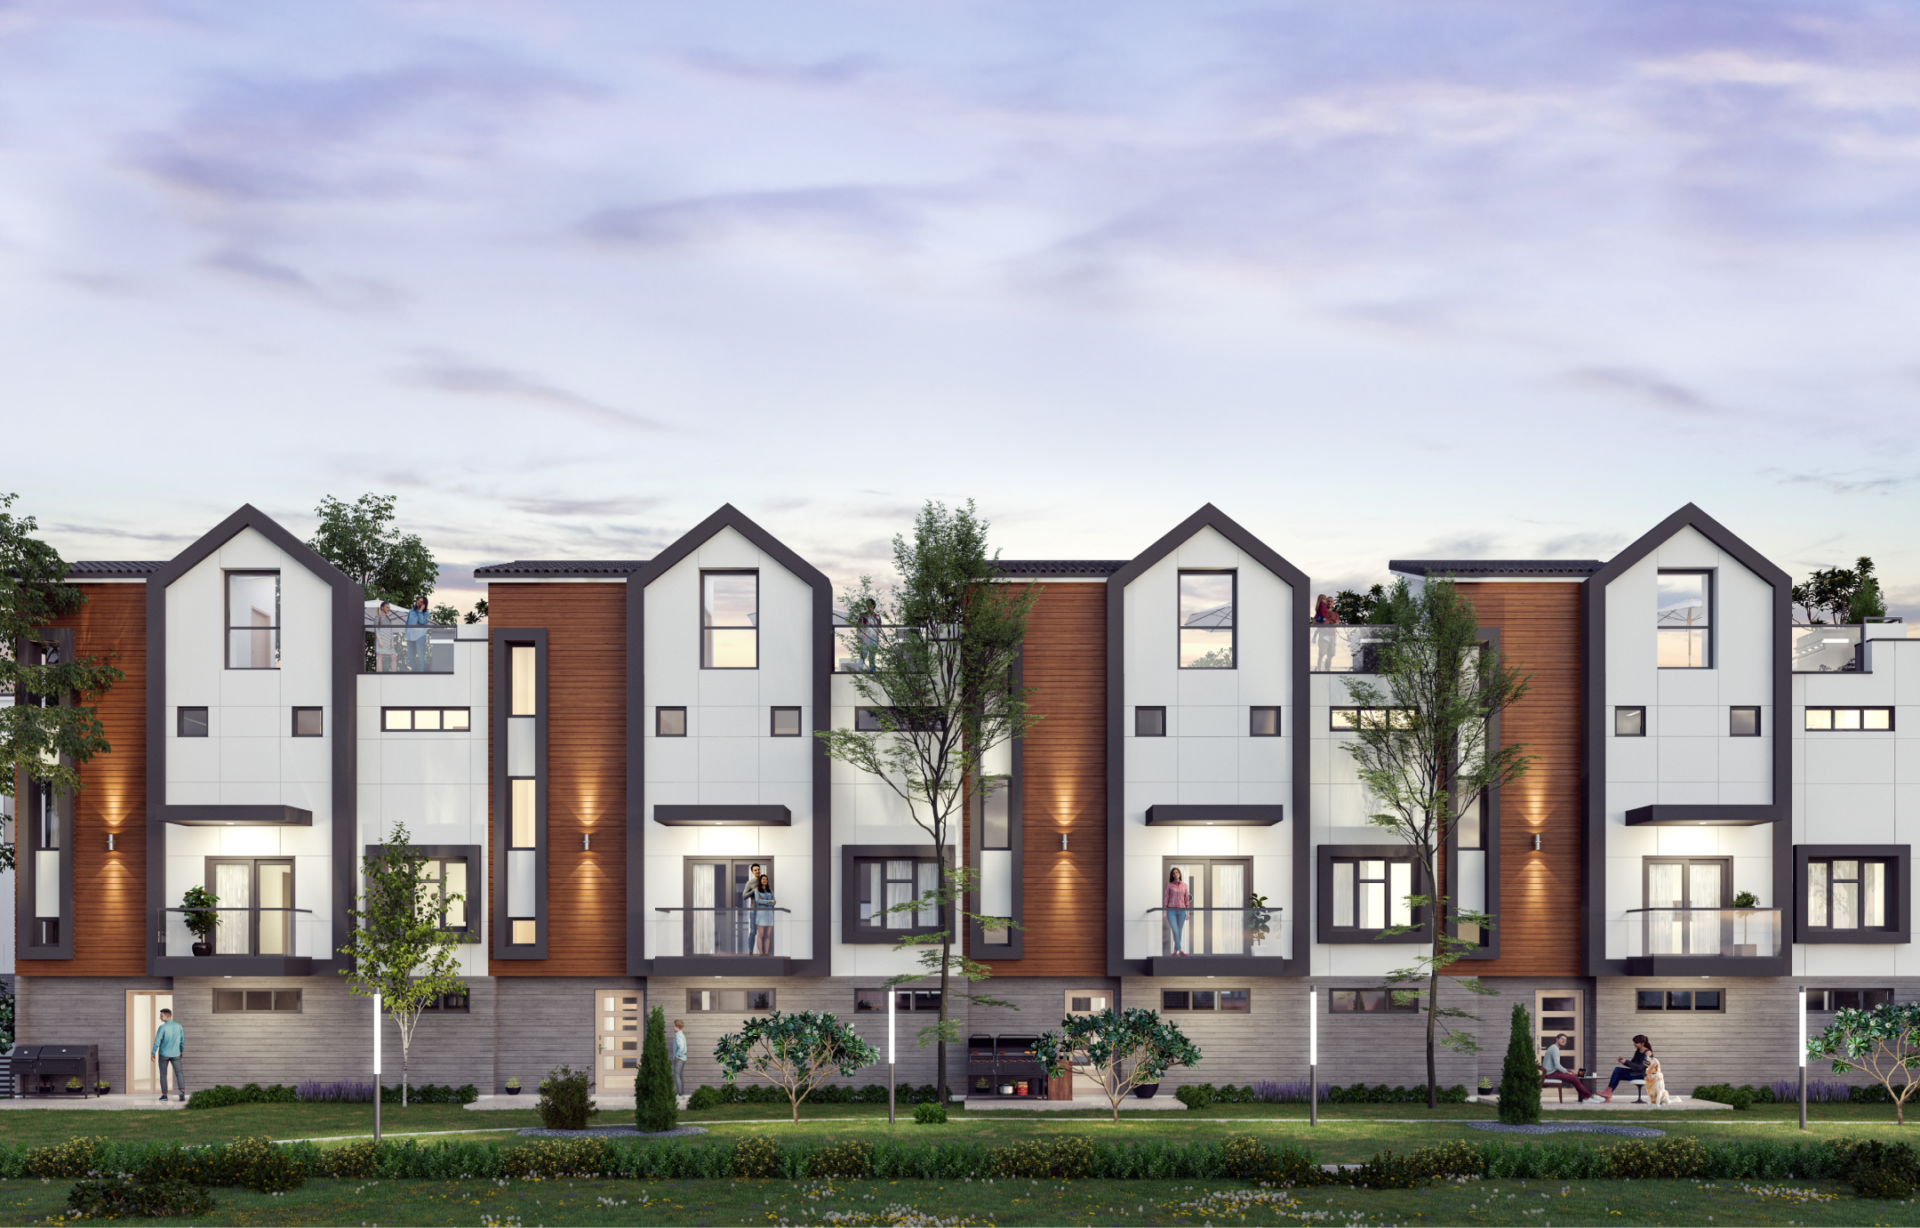 Finestra by MetroVan Builders Group is a 123-unit South Surrey townhome development.